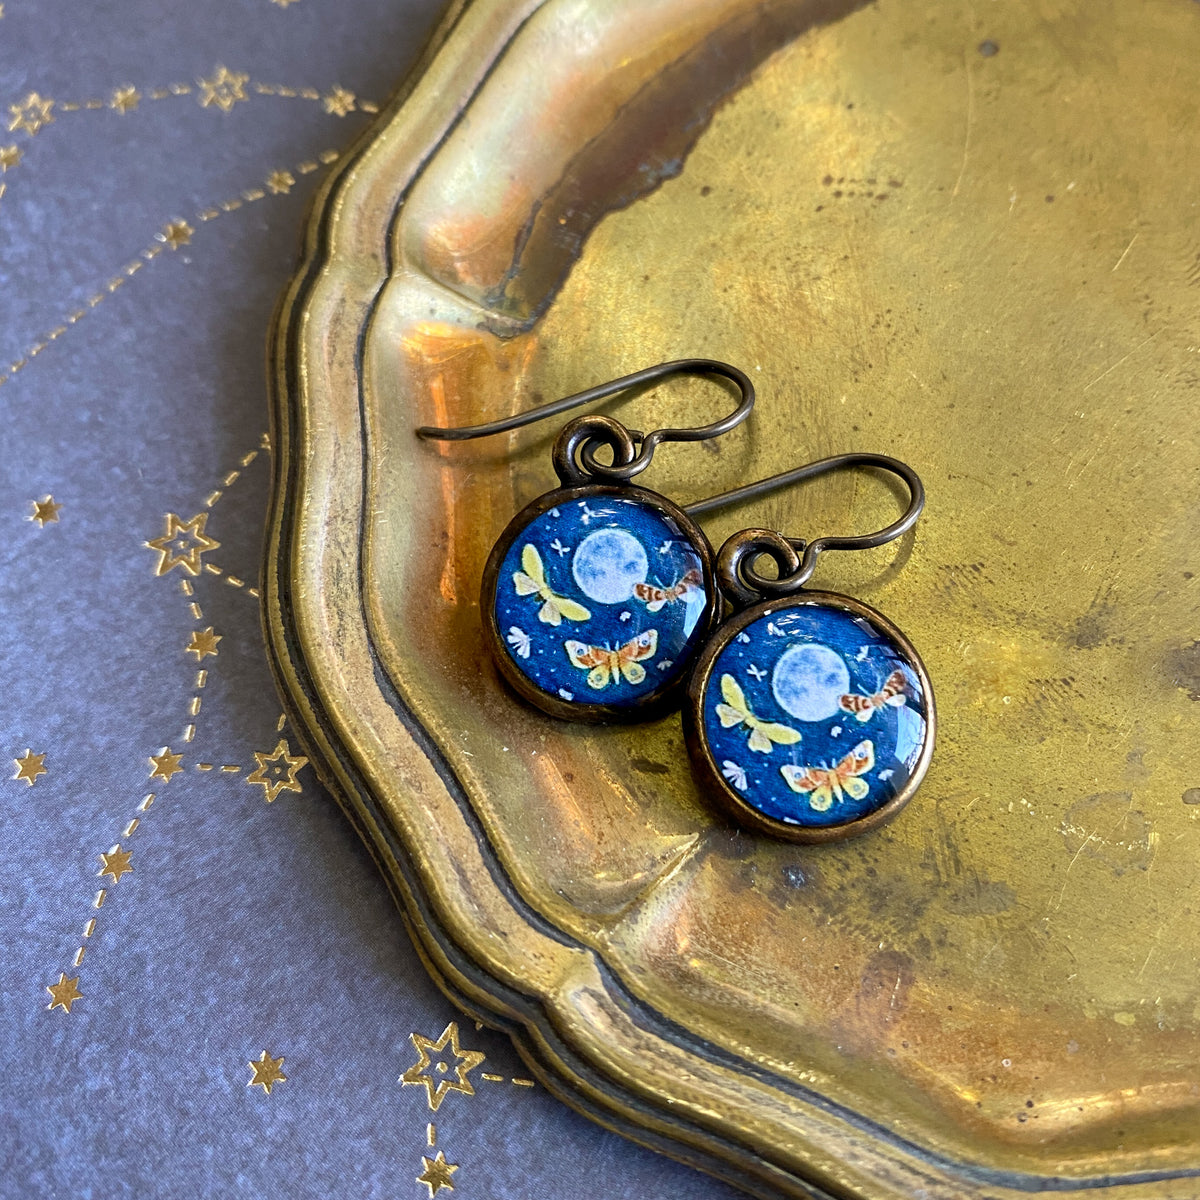 a pair of blue earrings sitting on top of a metal tray